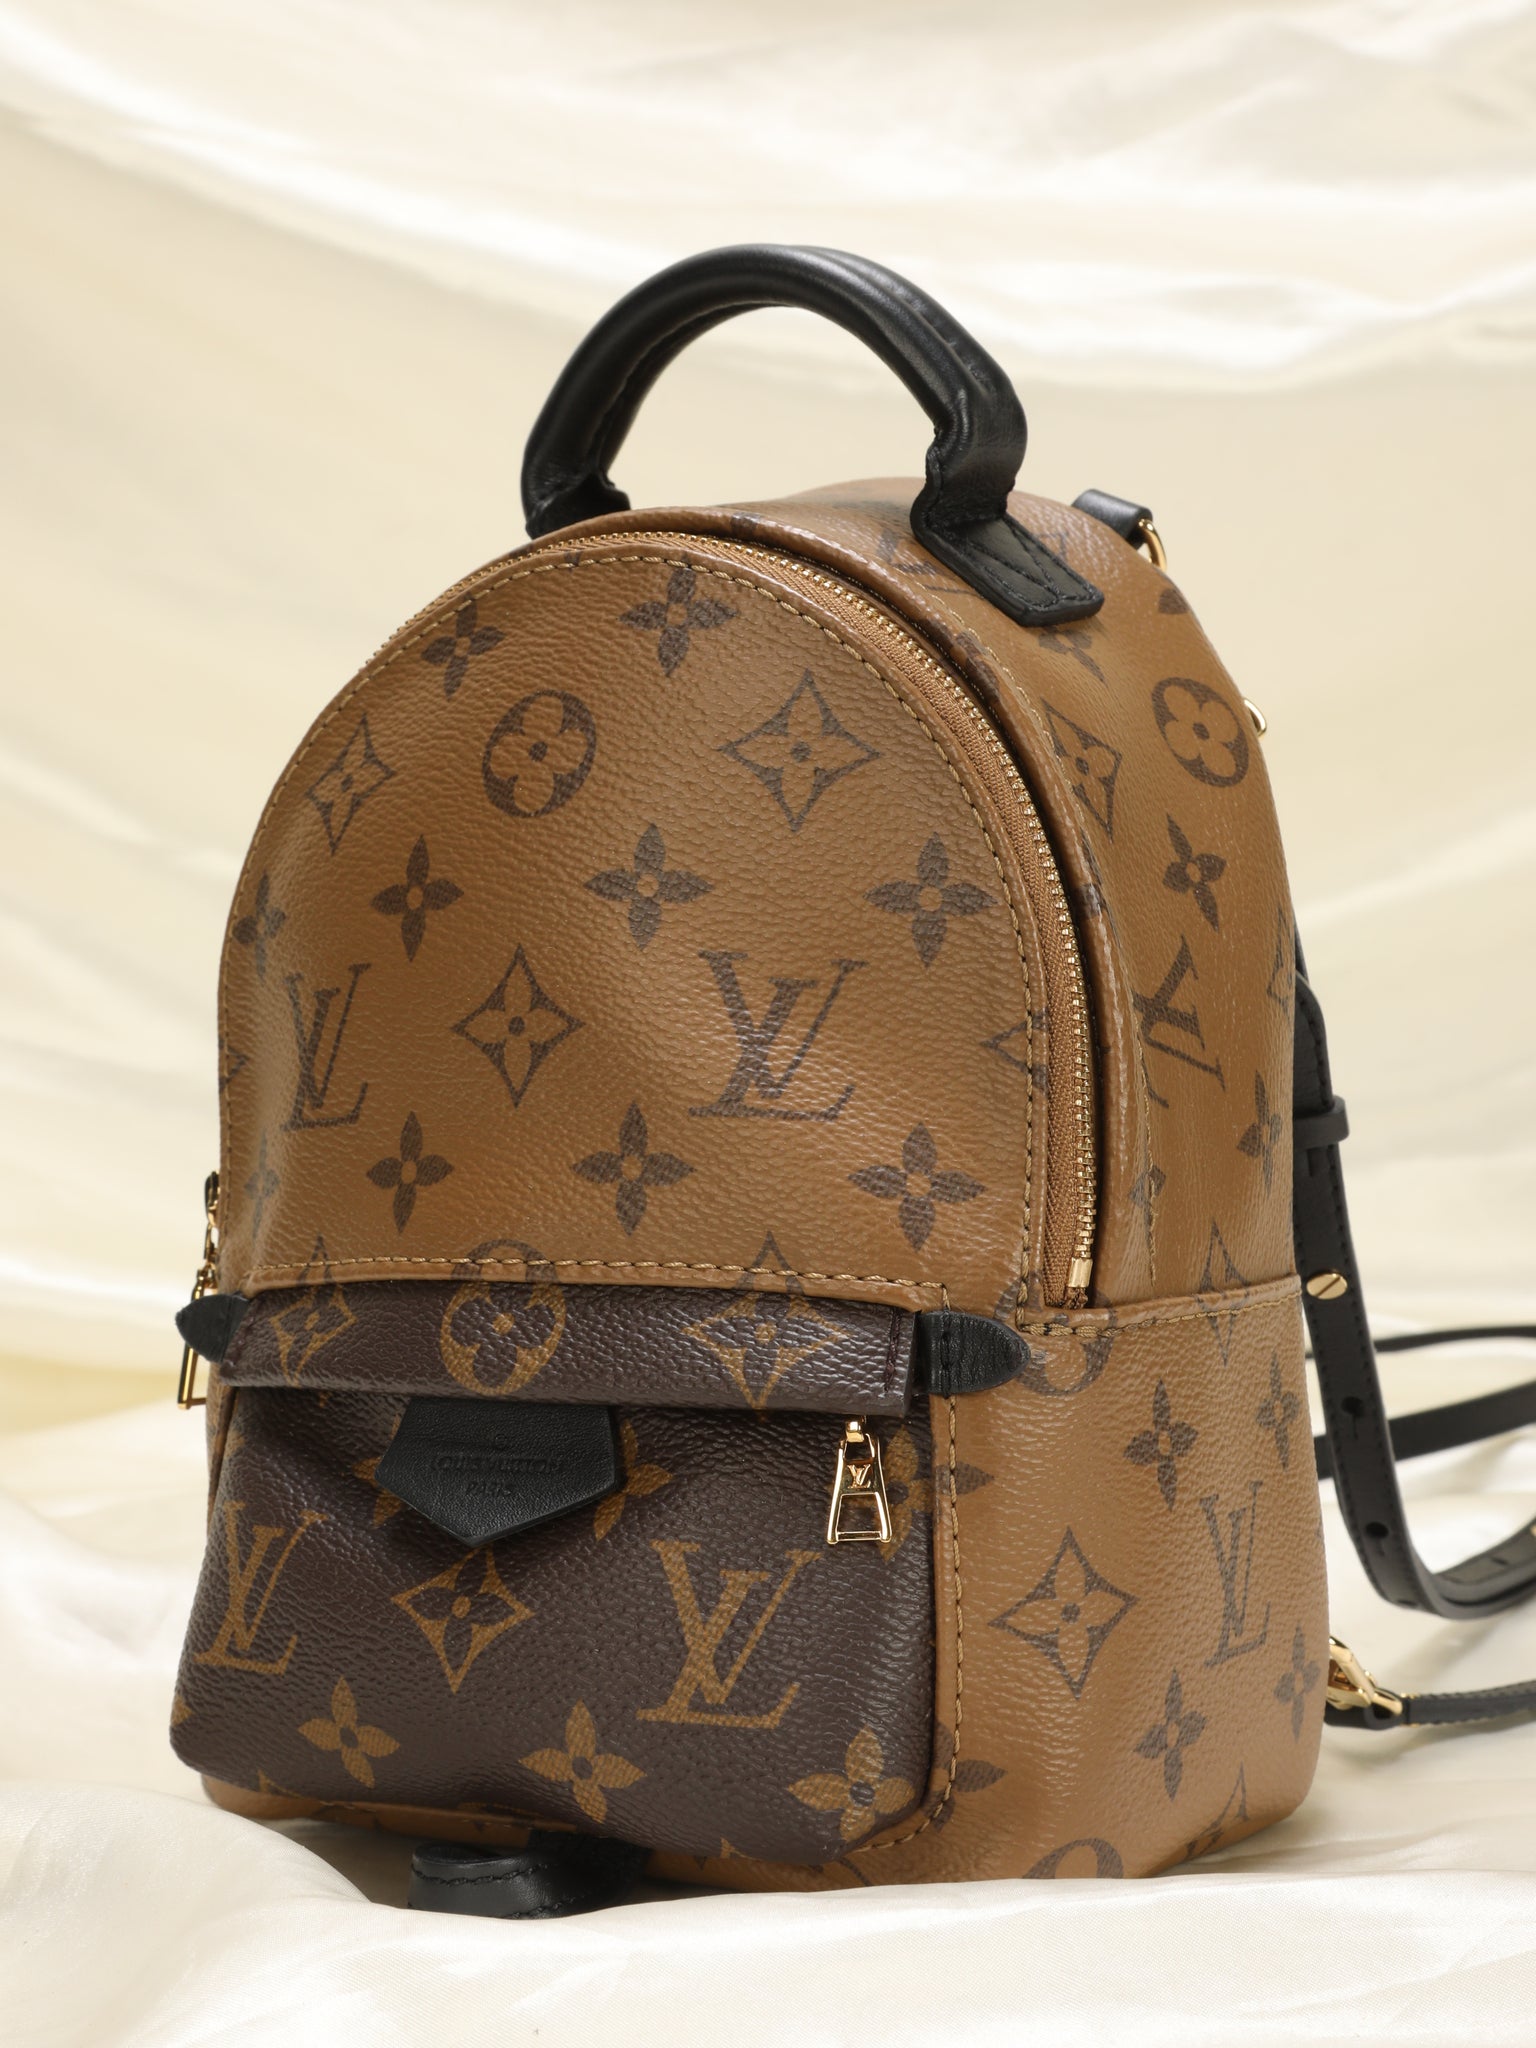 Preloved Louis Vuitton Palm Springs PM Backpack Limited Edition